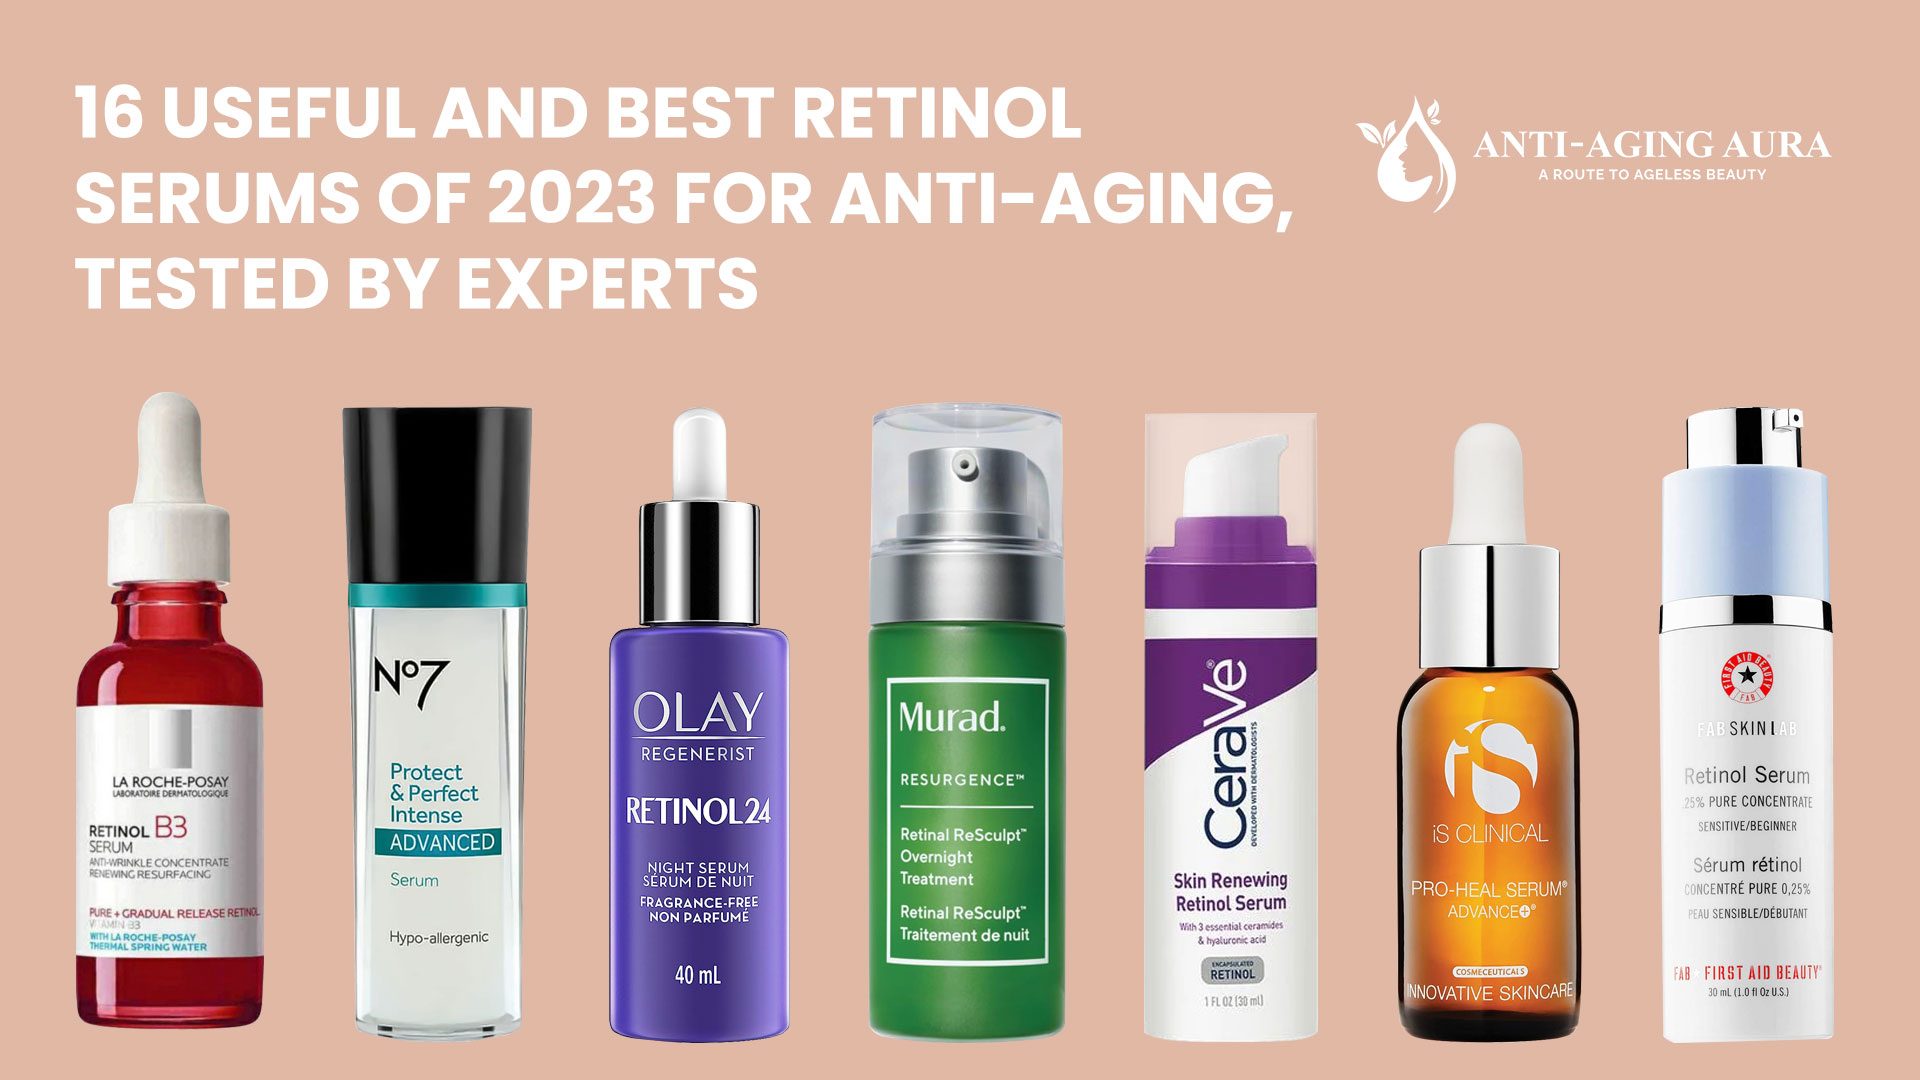 16 Useful and Best Retinol Serums of 2023 for Anti-Aging, Tested by Experts